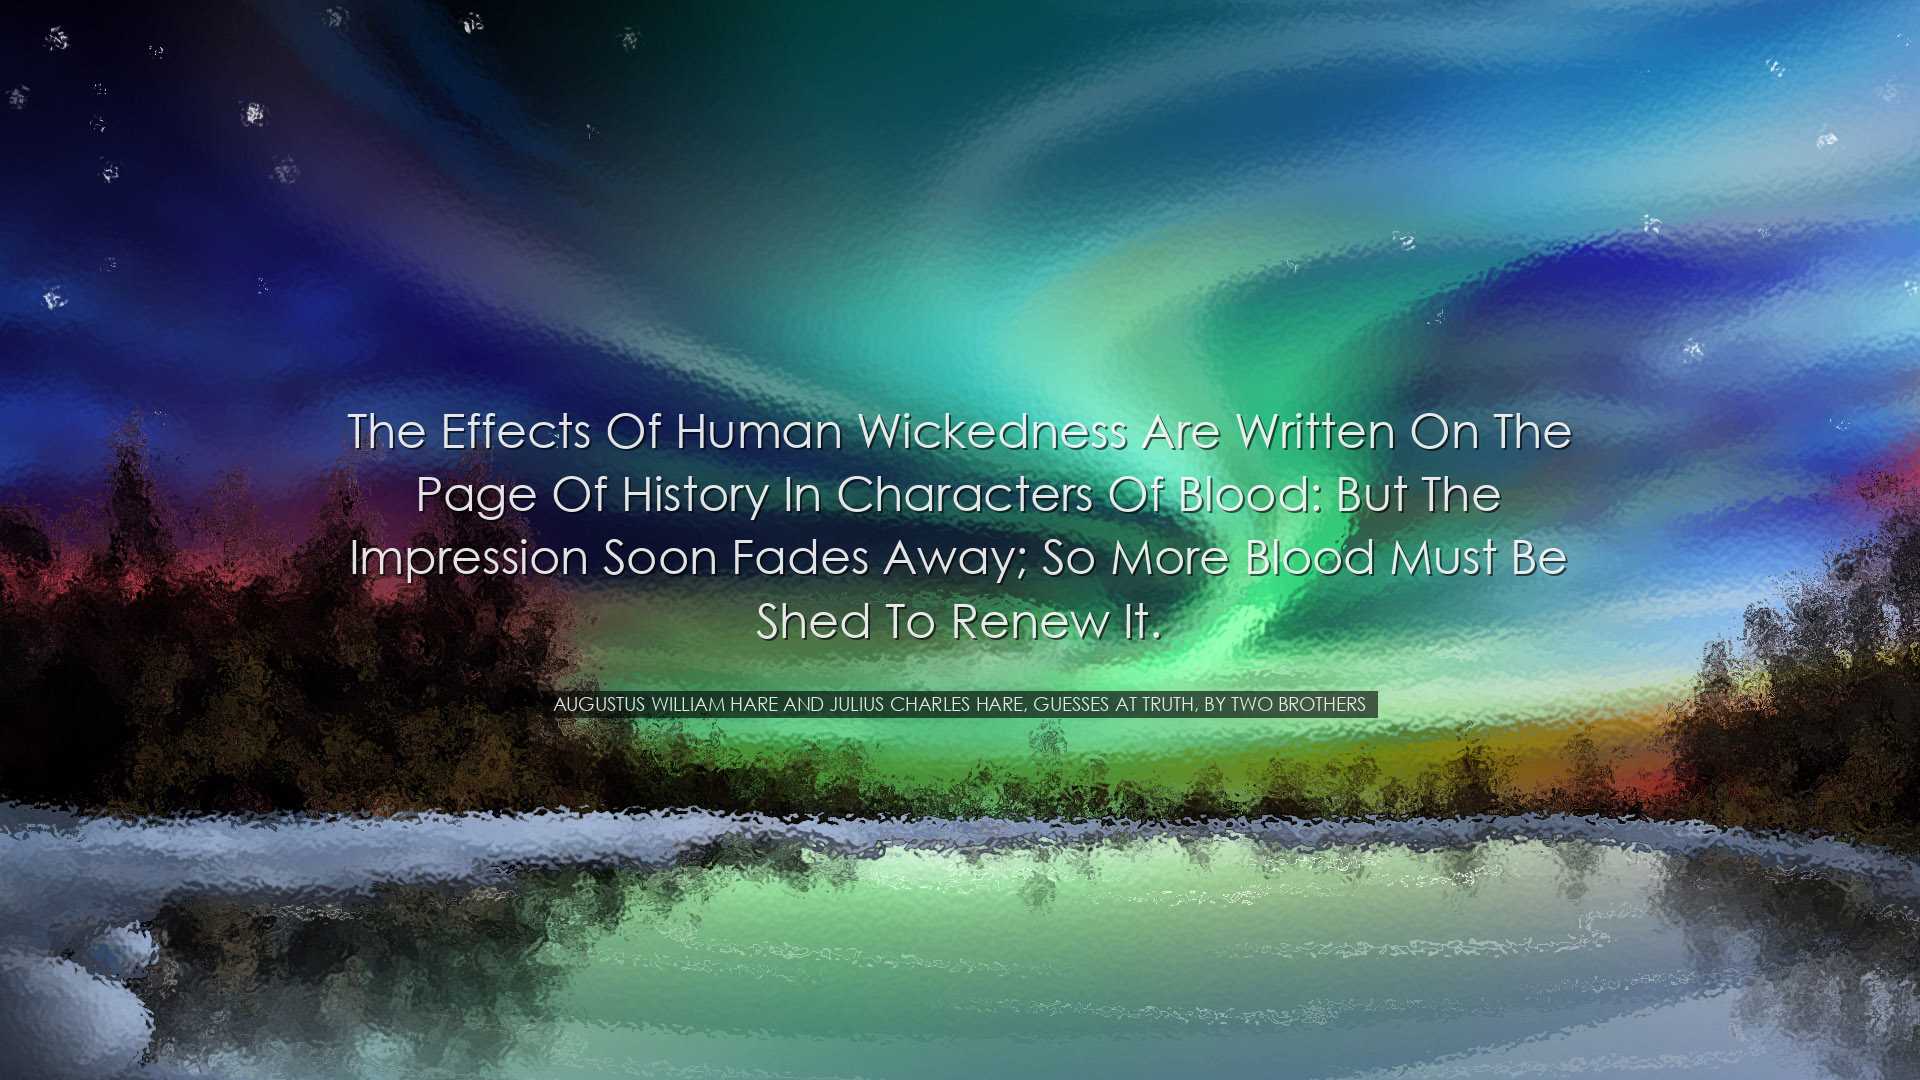 The effects of human wickedness are written on the page of history